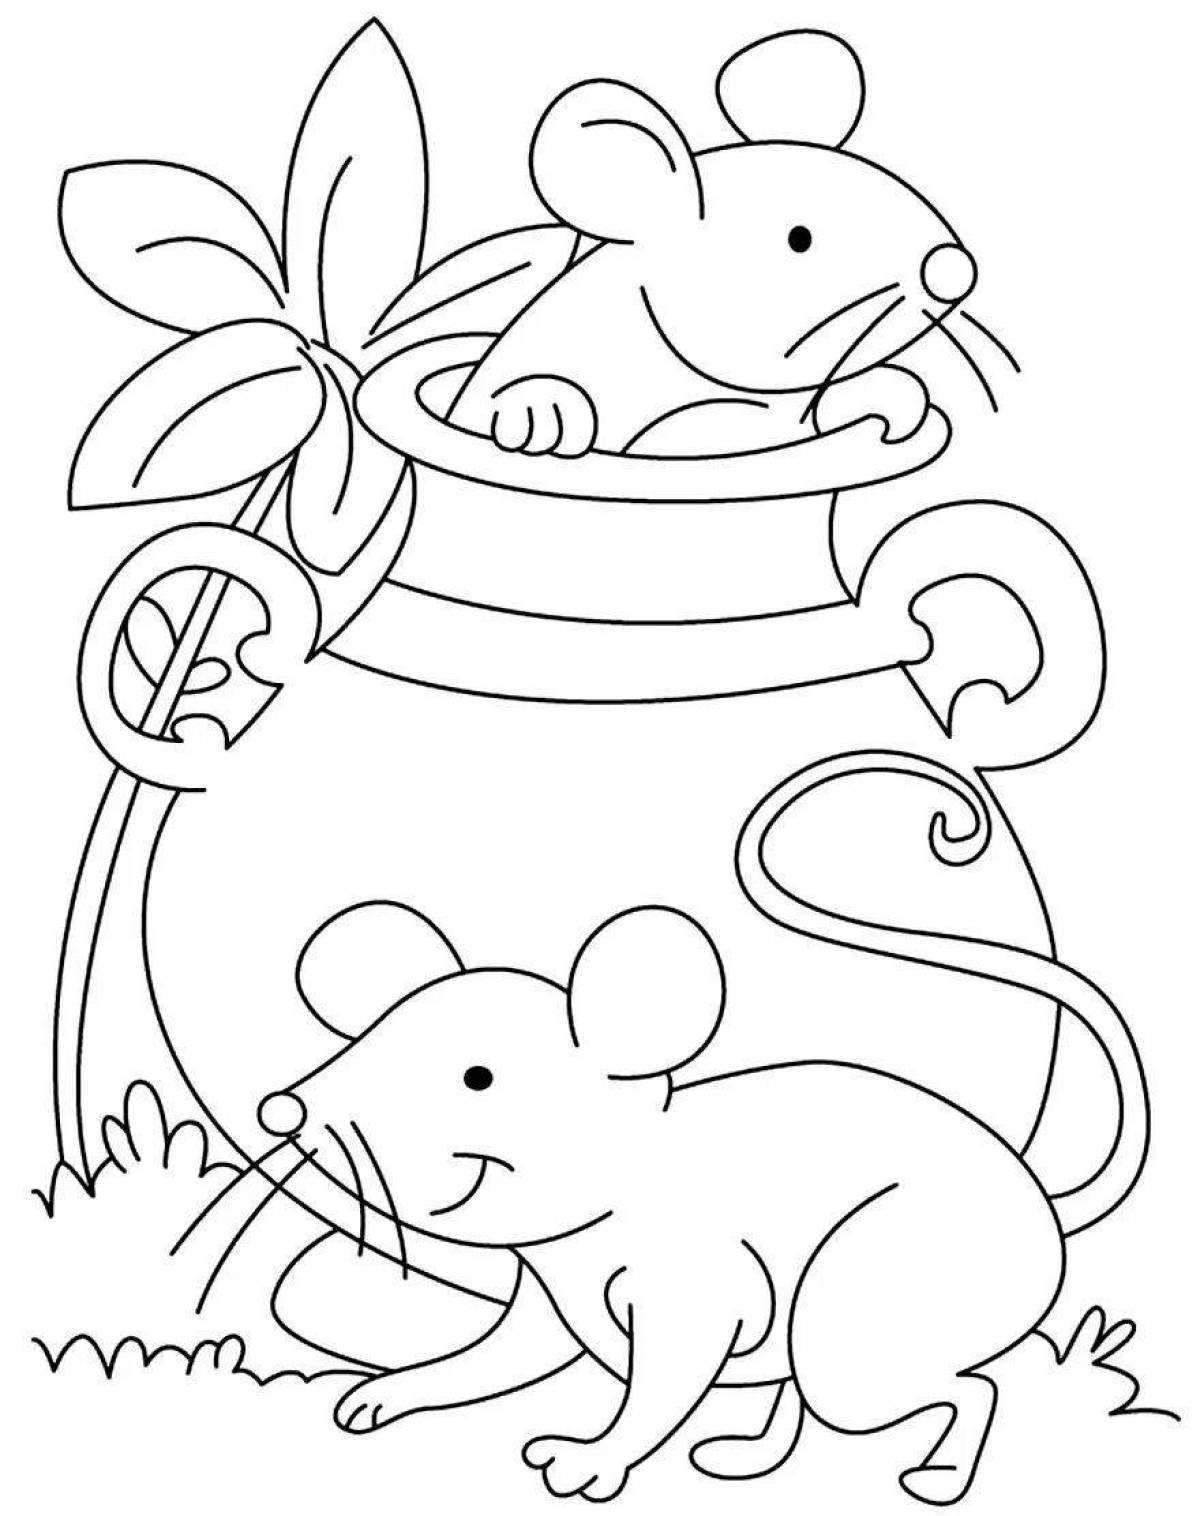 Glamor coloring mouse for children 2-3 years old